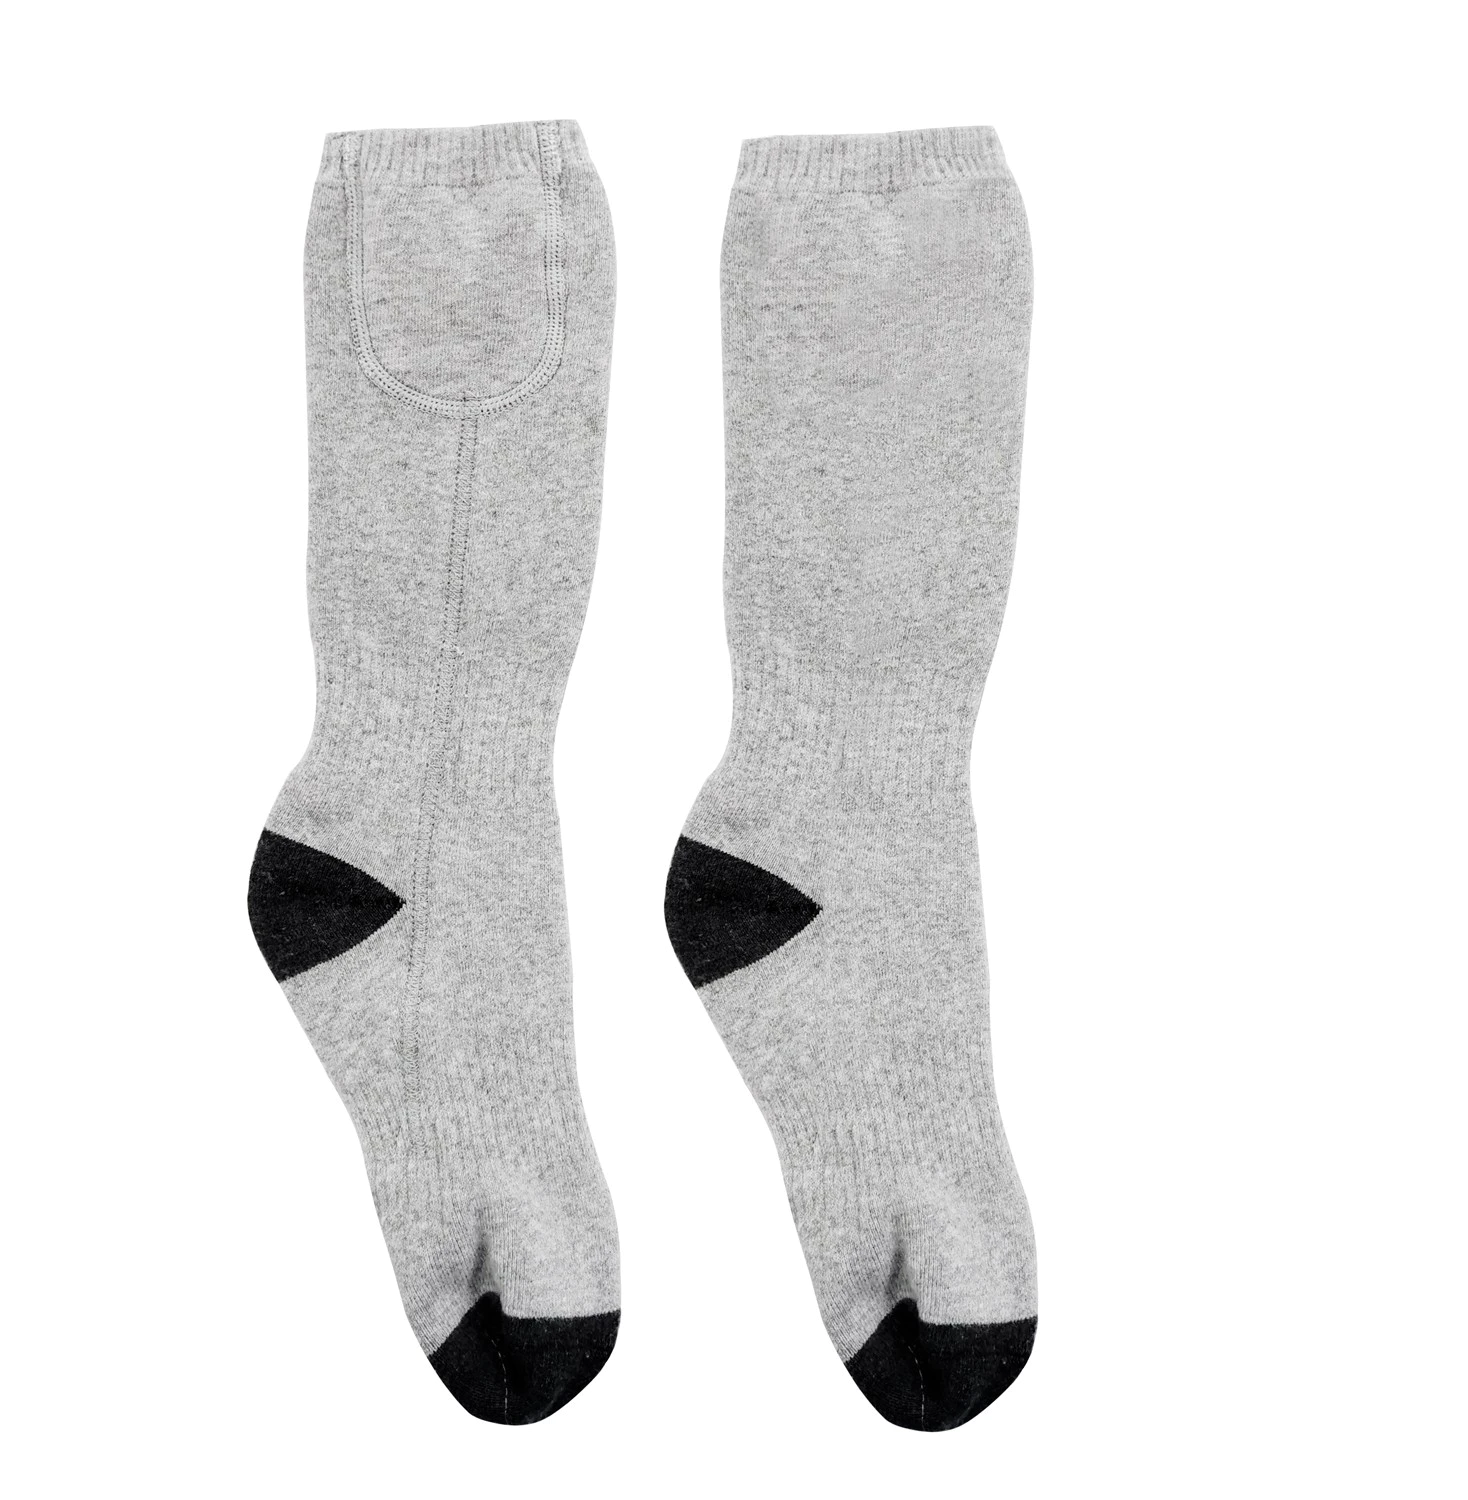 cotton battery heated socks heating keep you warm all day for winter